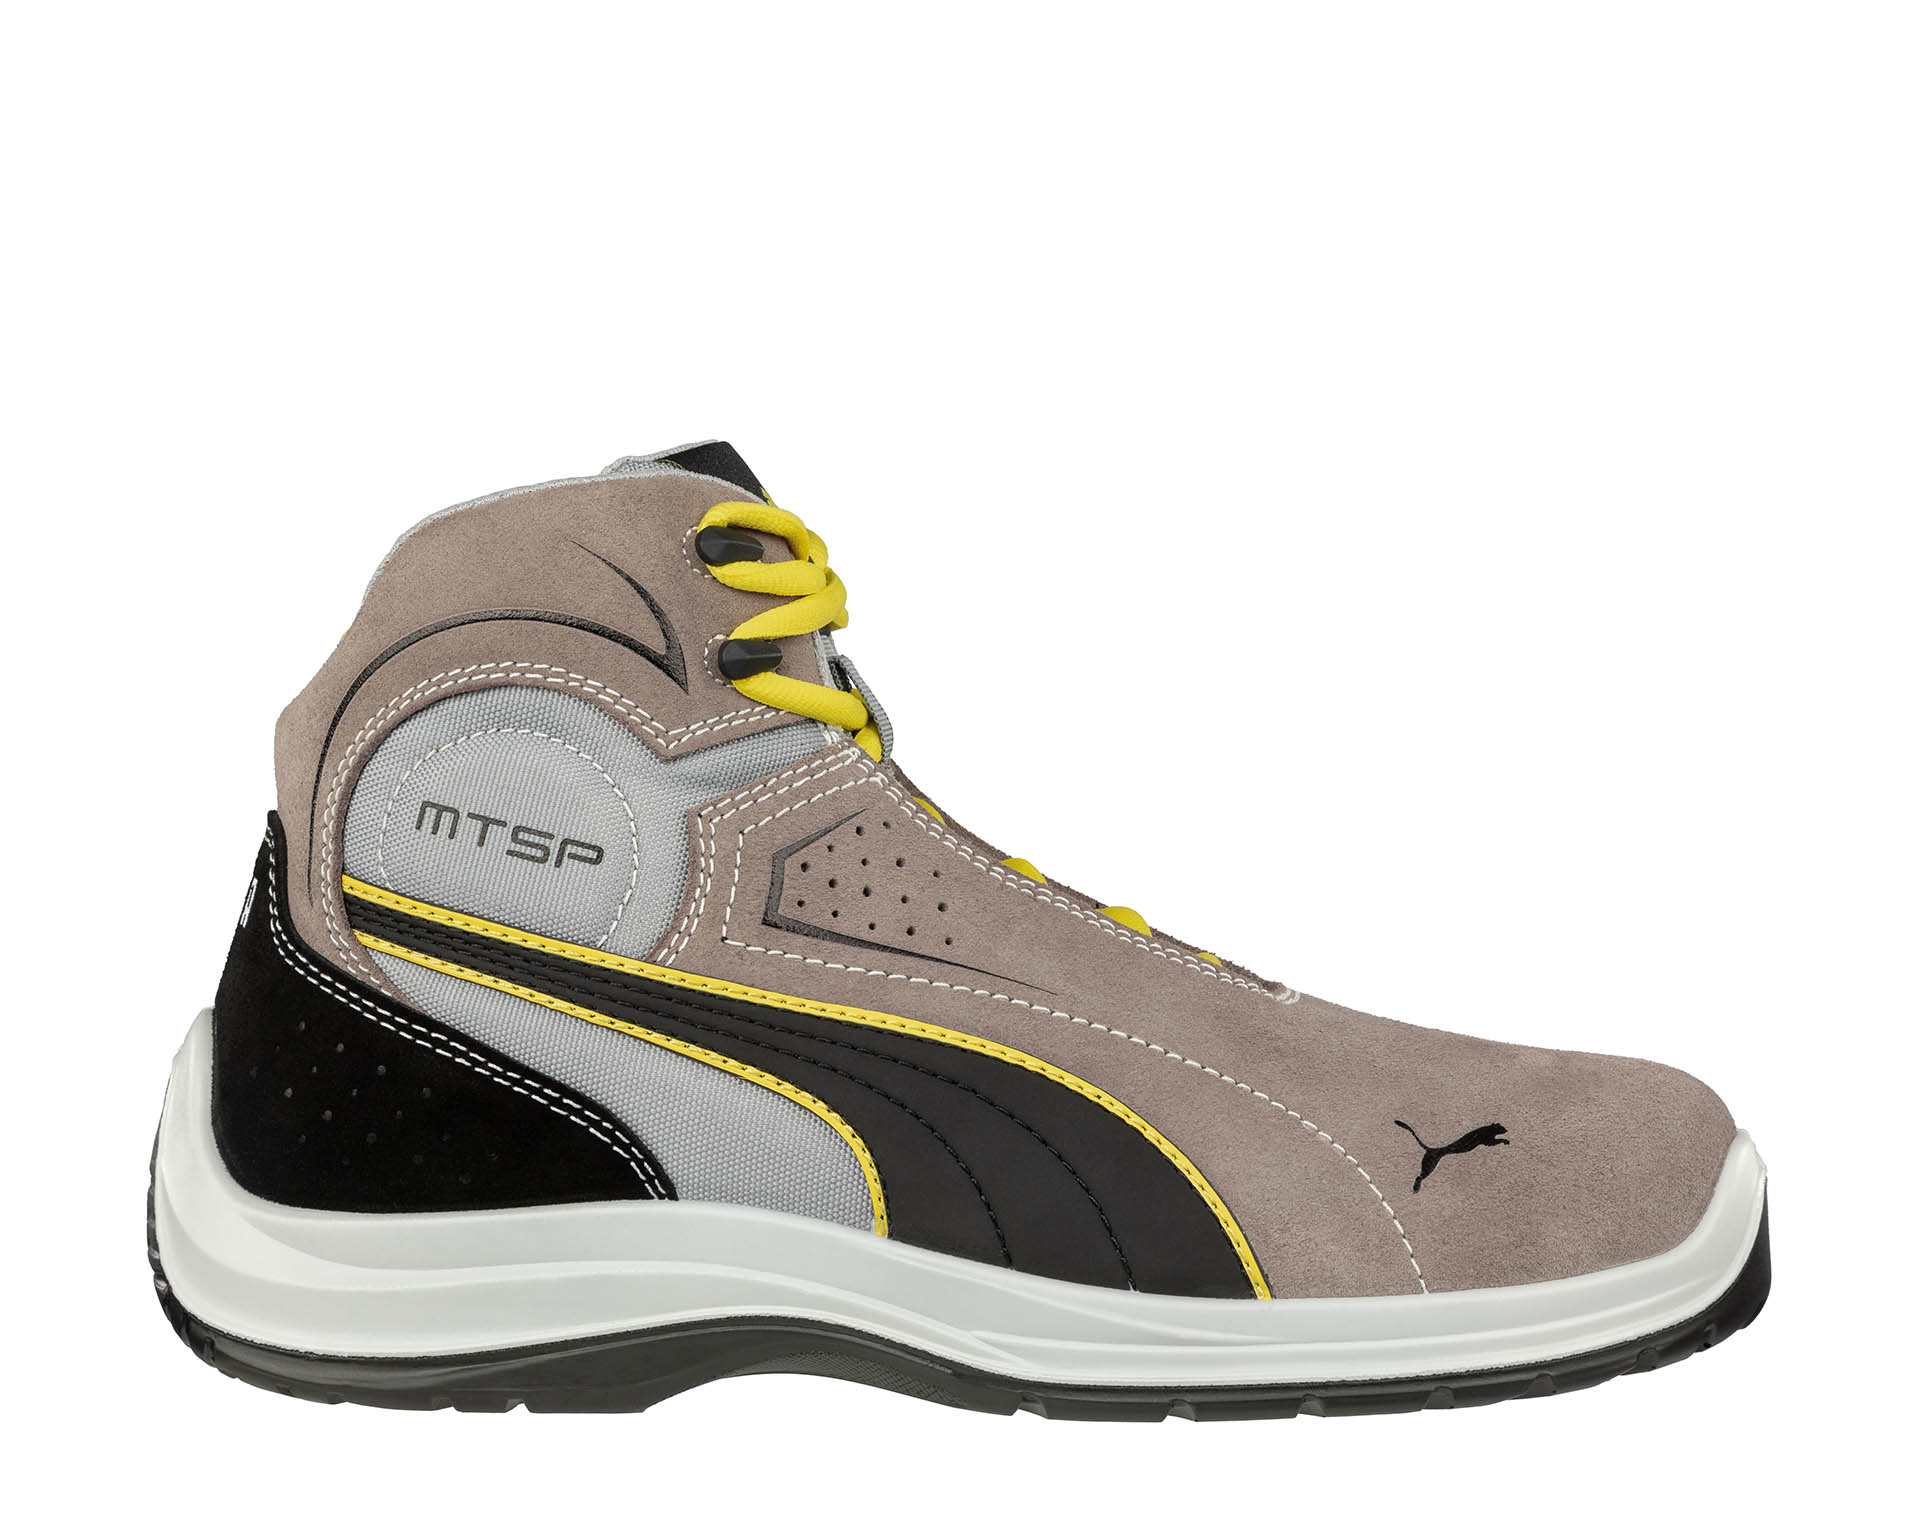 PUMA SAFETY safety TOURING STONE Puma MID | S3 shoes English SRC Safety